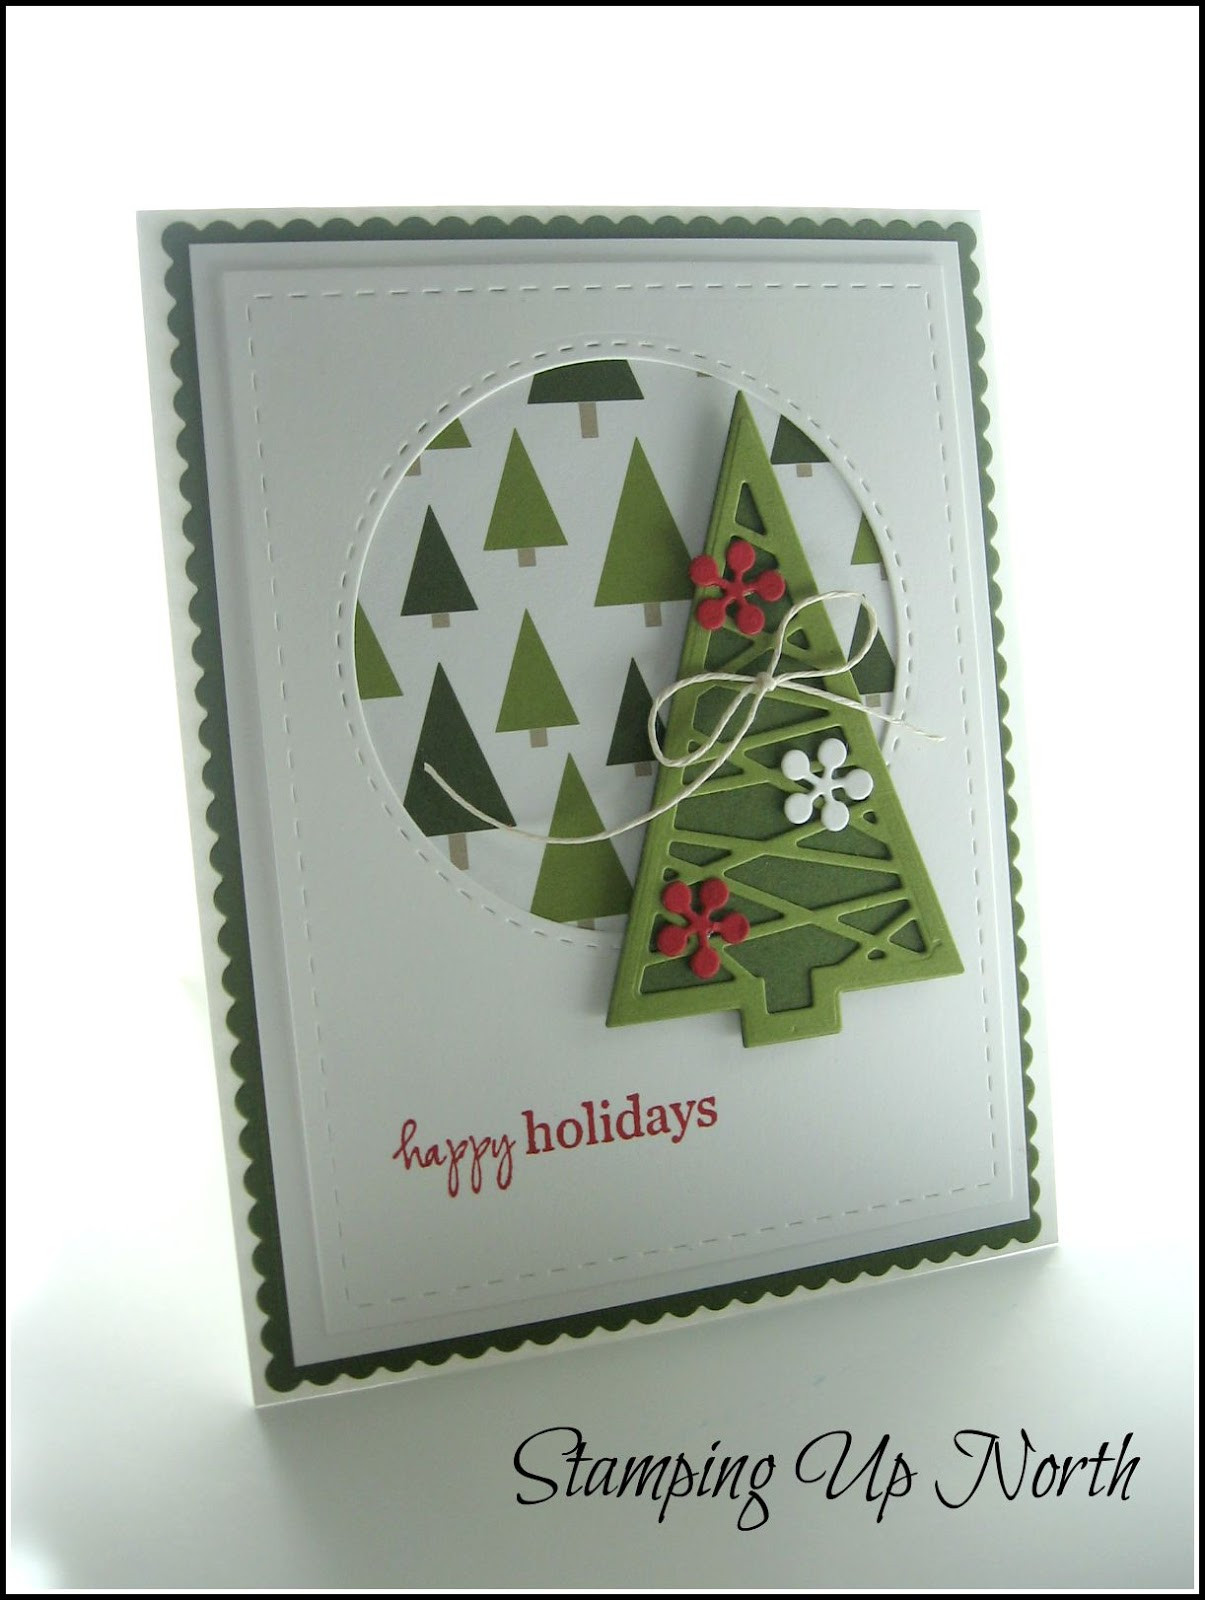 Stampinup Christmas Card Ideas
 stamping up north with laurie Stampin Up Merry Moments